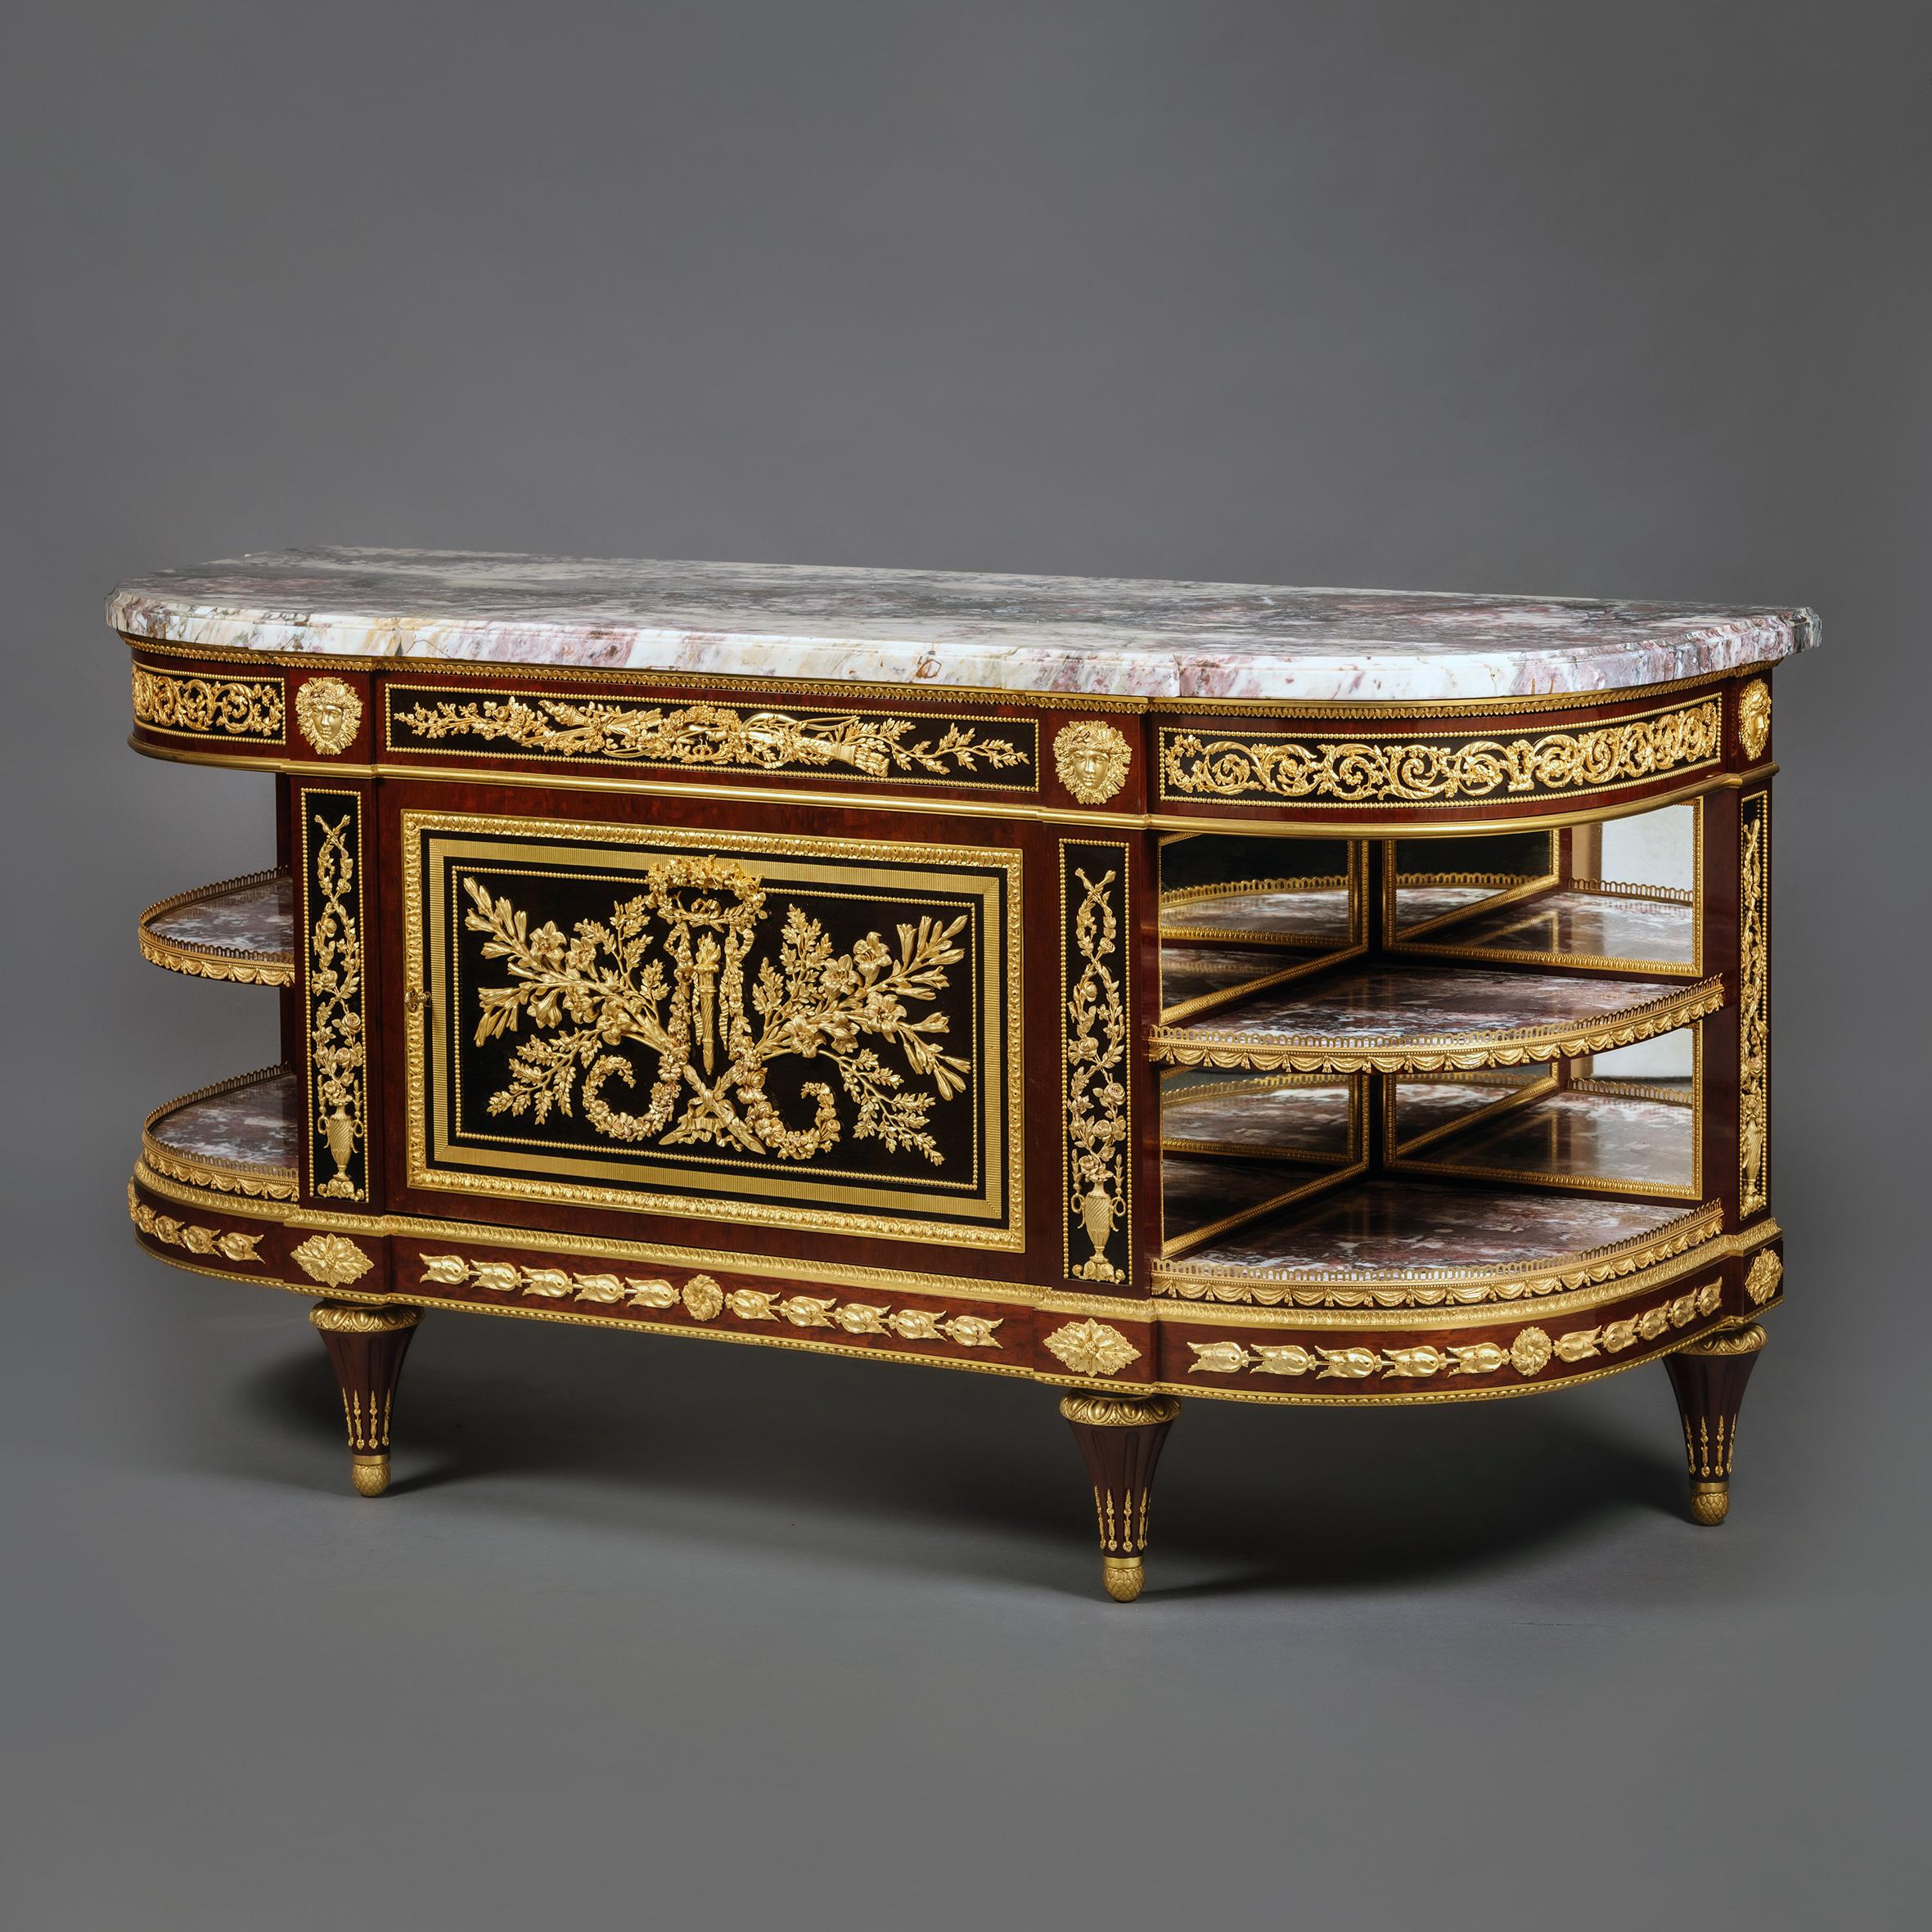 19th Century A Louis XVI Style Gilt-Bronze Mounted Mahogany and Ebonised Commode à l'Anglaise For Sale